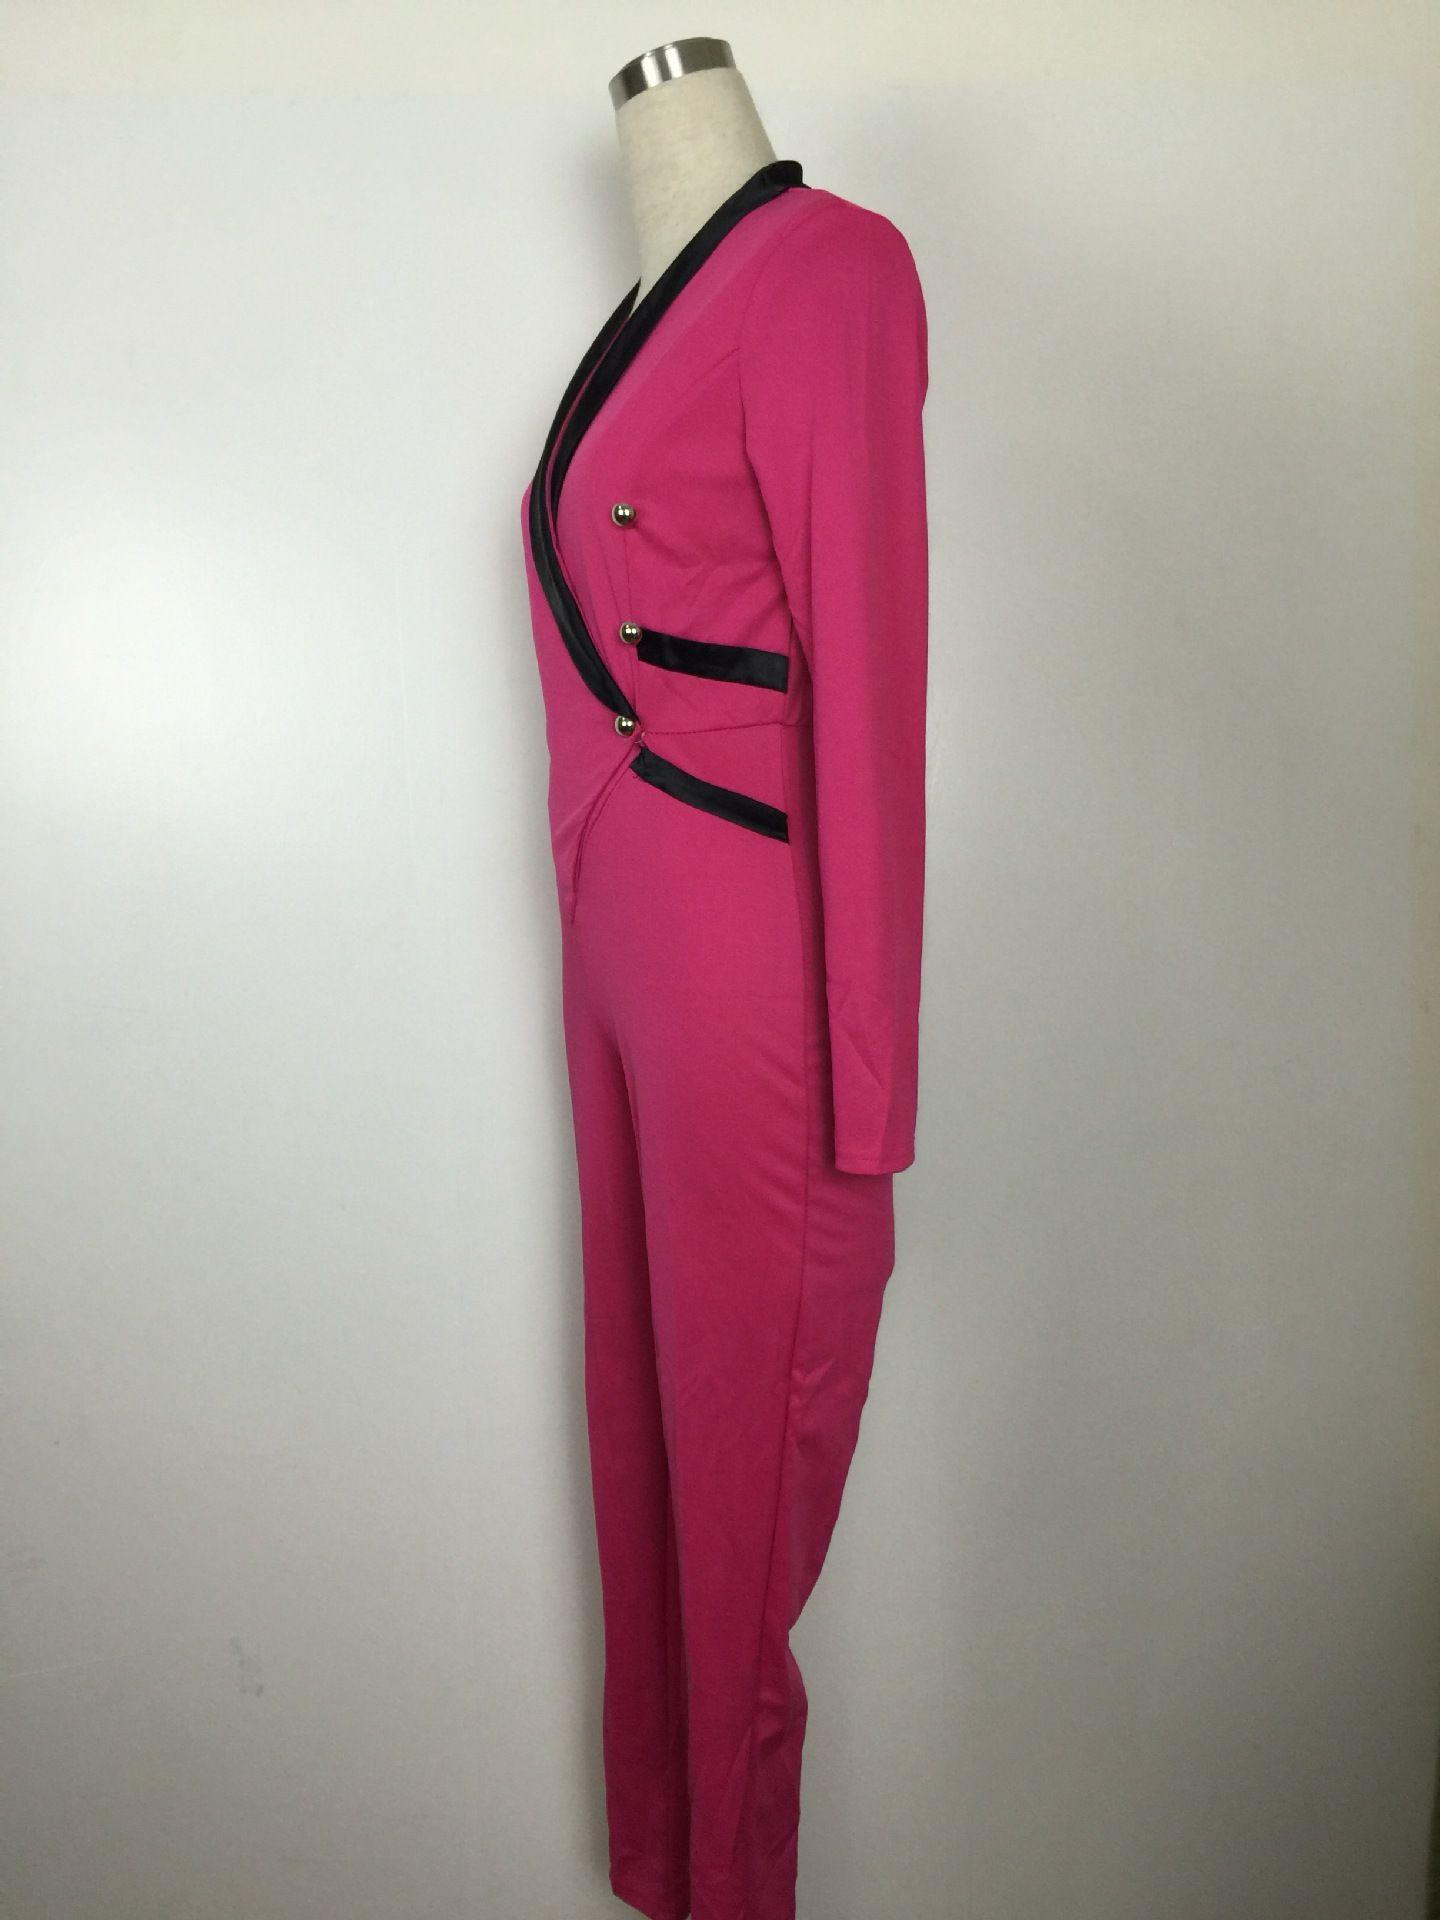 Sexy Pink V-Neck Bodycon Jumpsuit